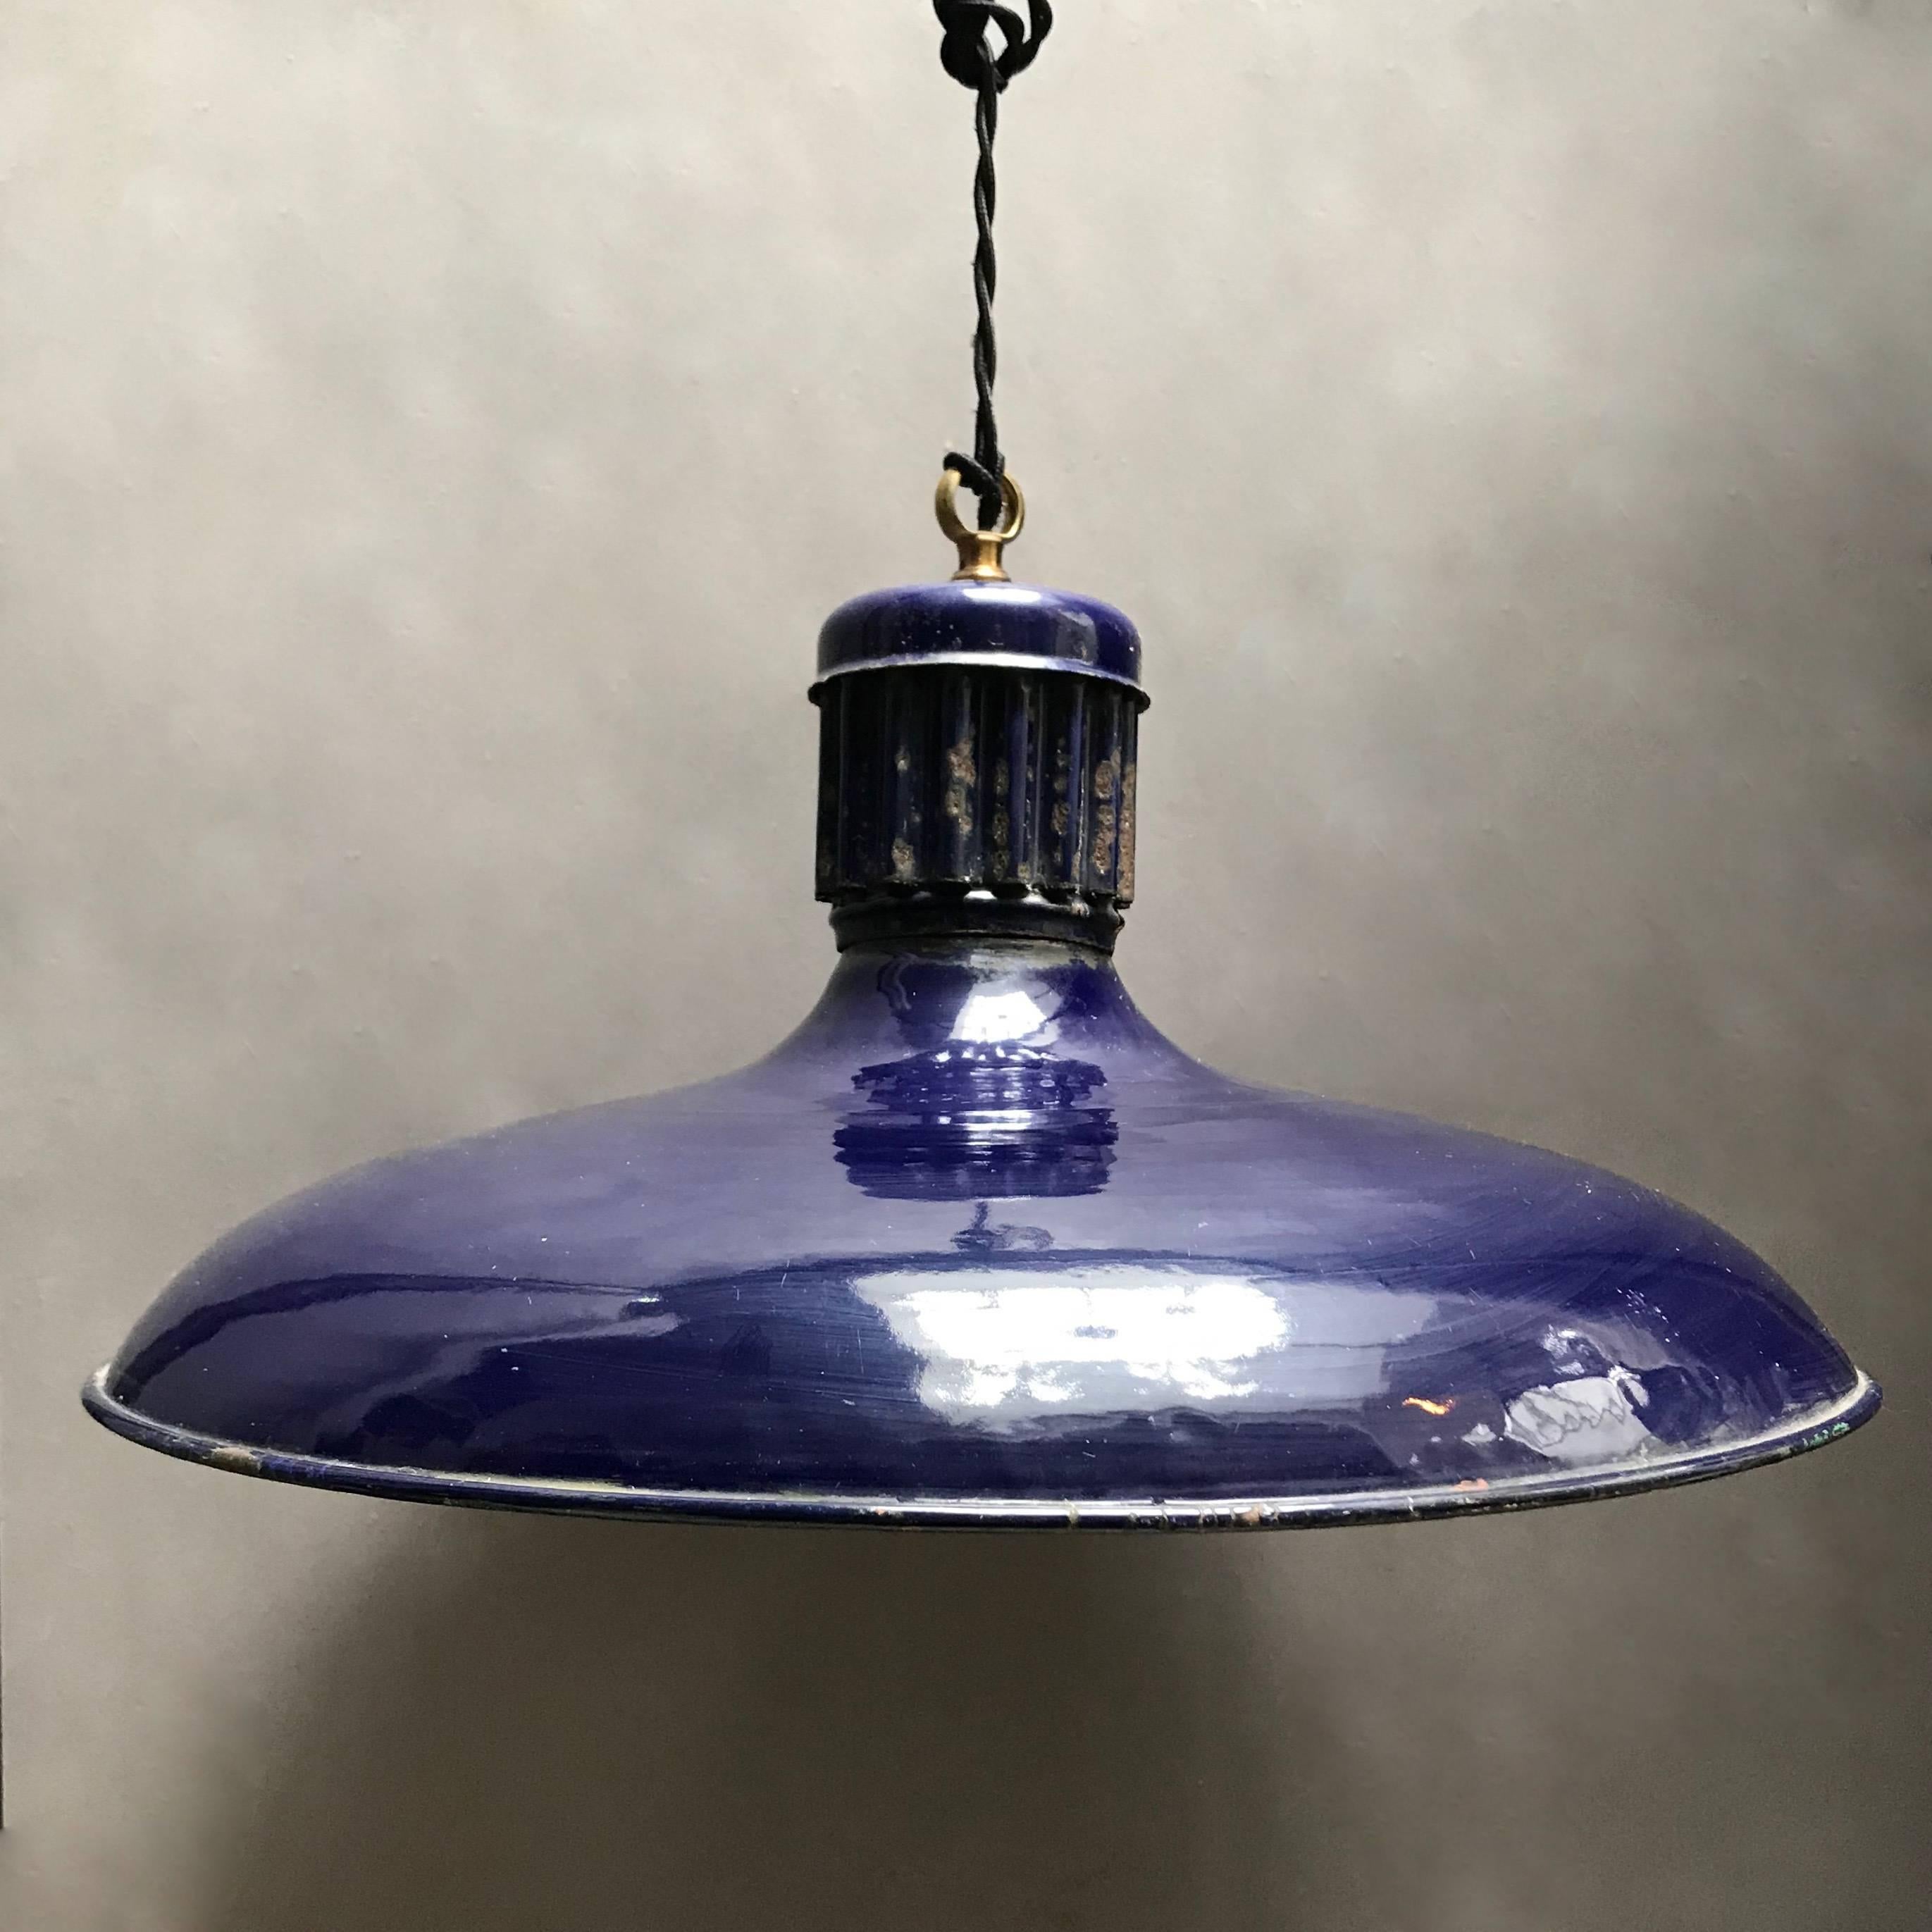 Industrial, railroad station pendant light features a deep cobalt blue enamel exterior with ribbed fitter and white interior is newly wired with 36 inches of braided black cloth cord to accept up to a 200 watt bulb.